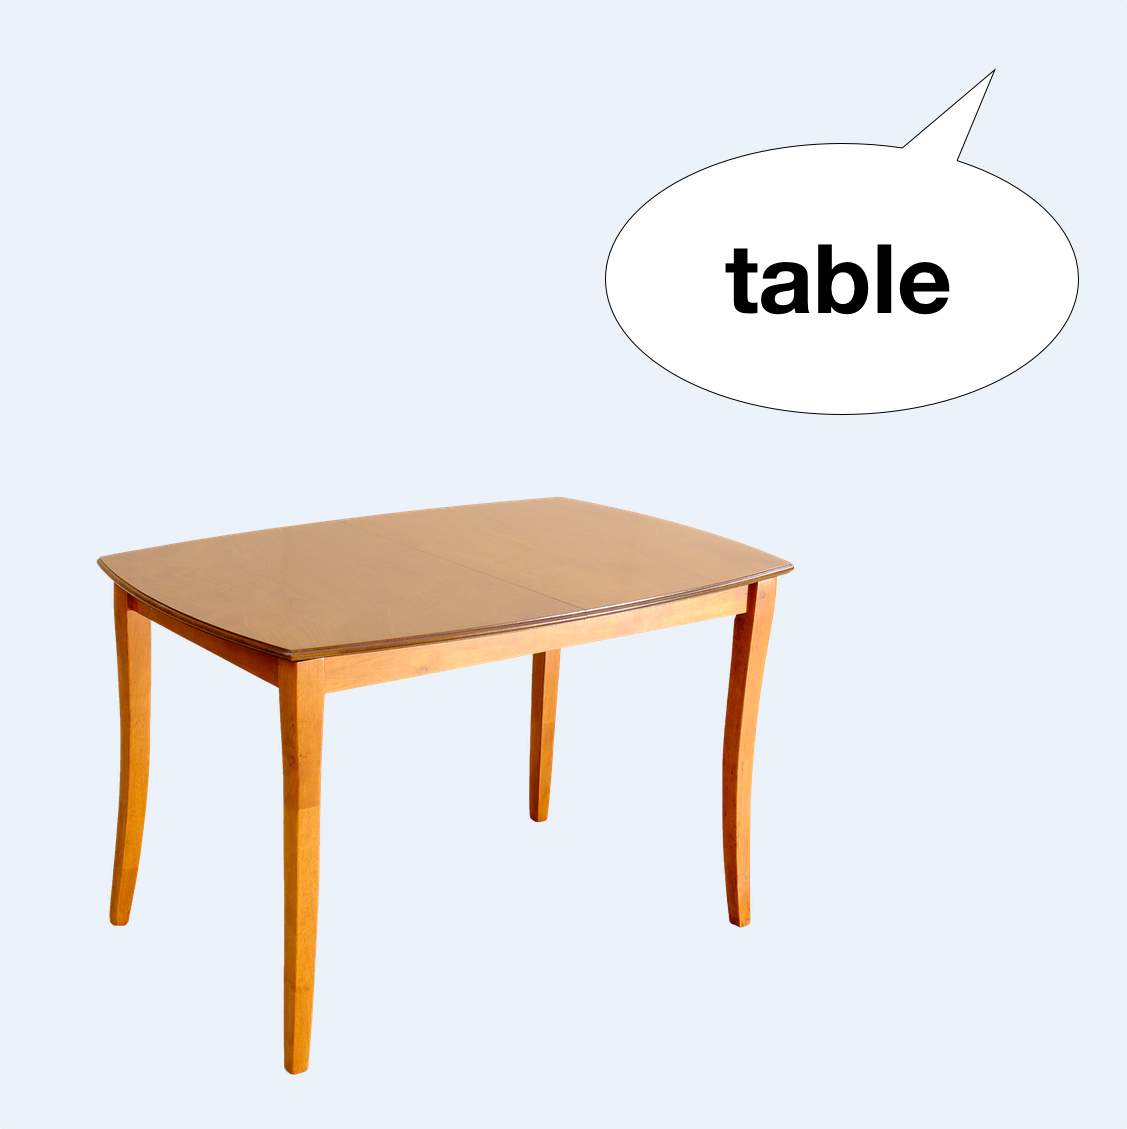 A wooden table with a speech bubble designed for an audience.